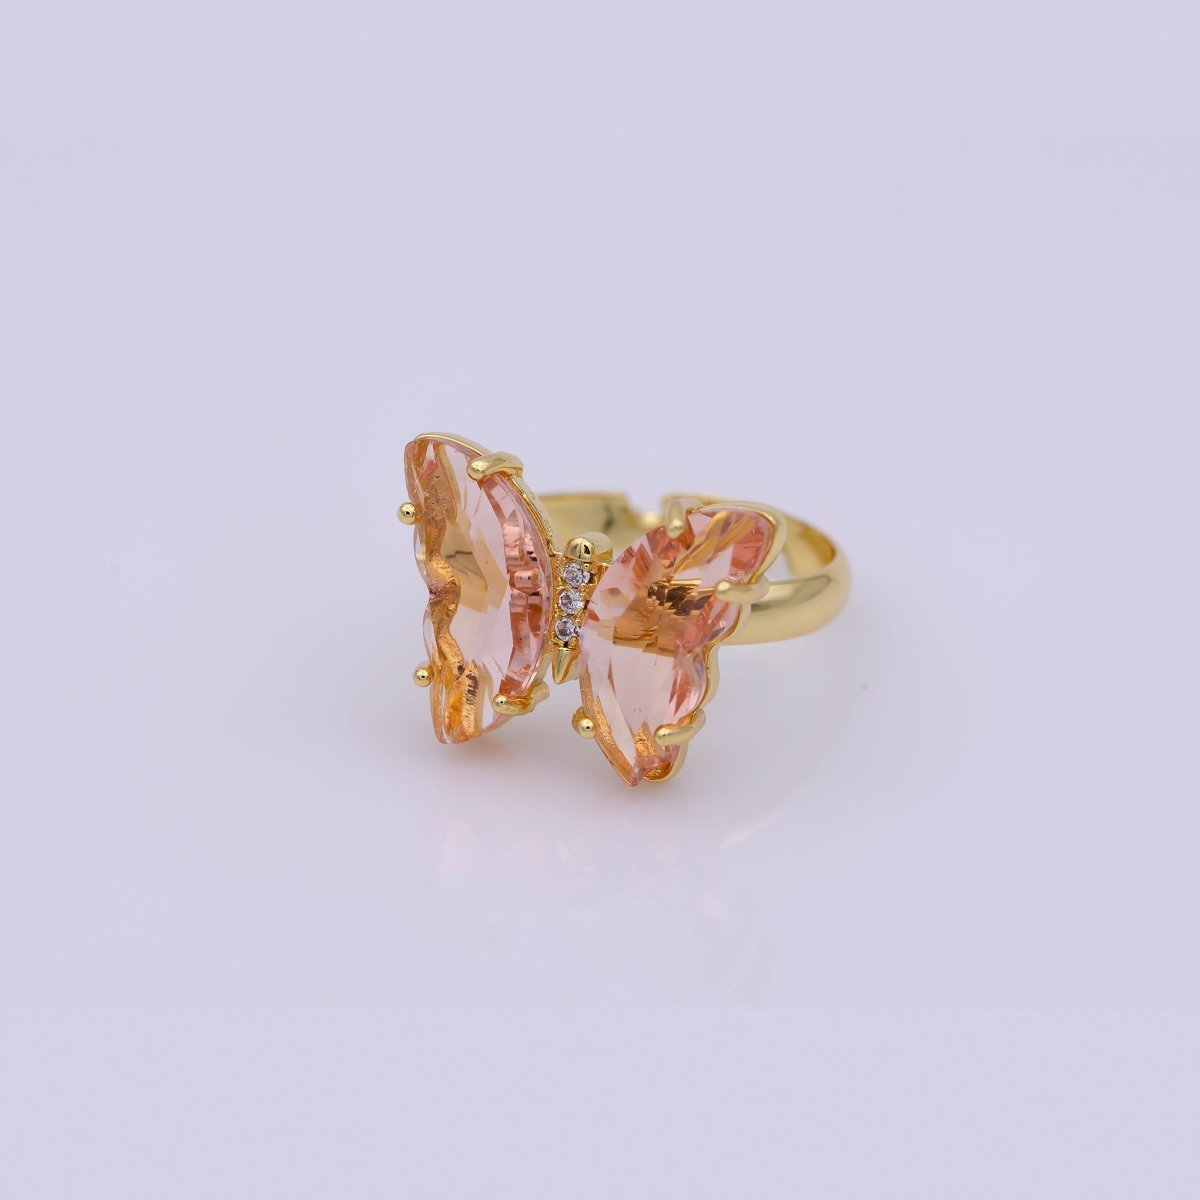 Dainty Butterfly Ring, Adjustable Gold Ring, Pink Cz Mariposa Ring, Animal Lover for Statement jewelry Stackable Everday Wear - DLUXCA